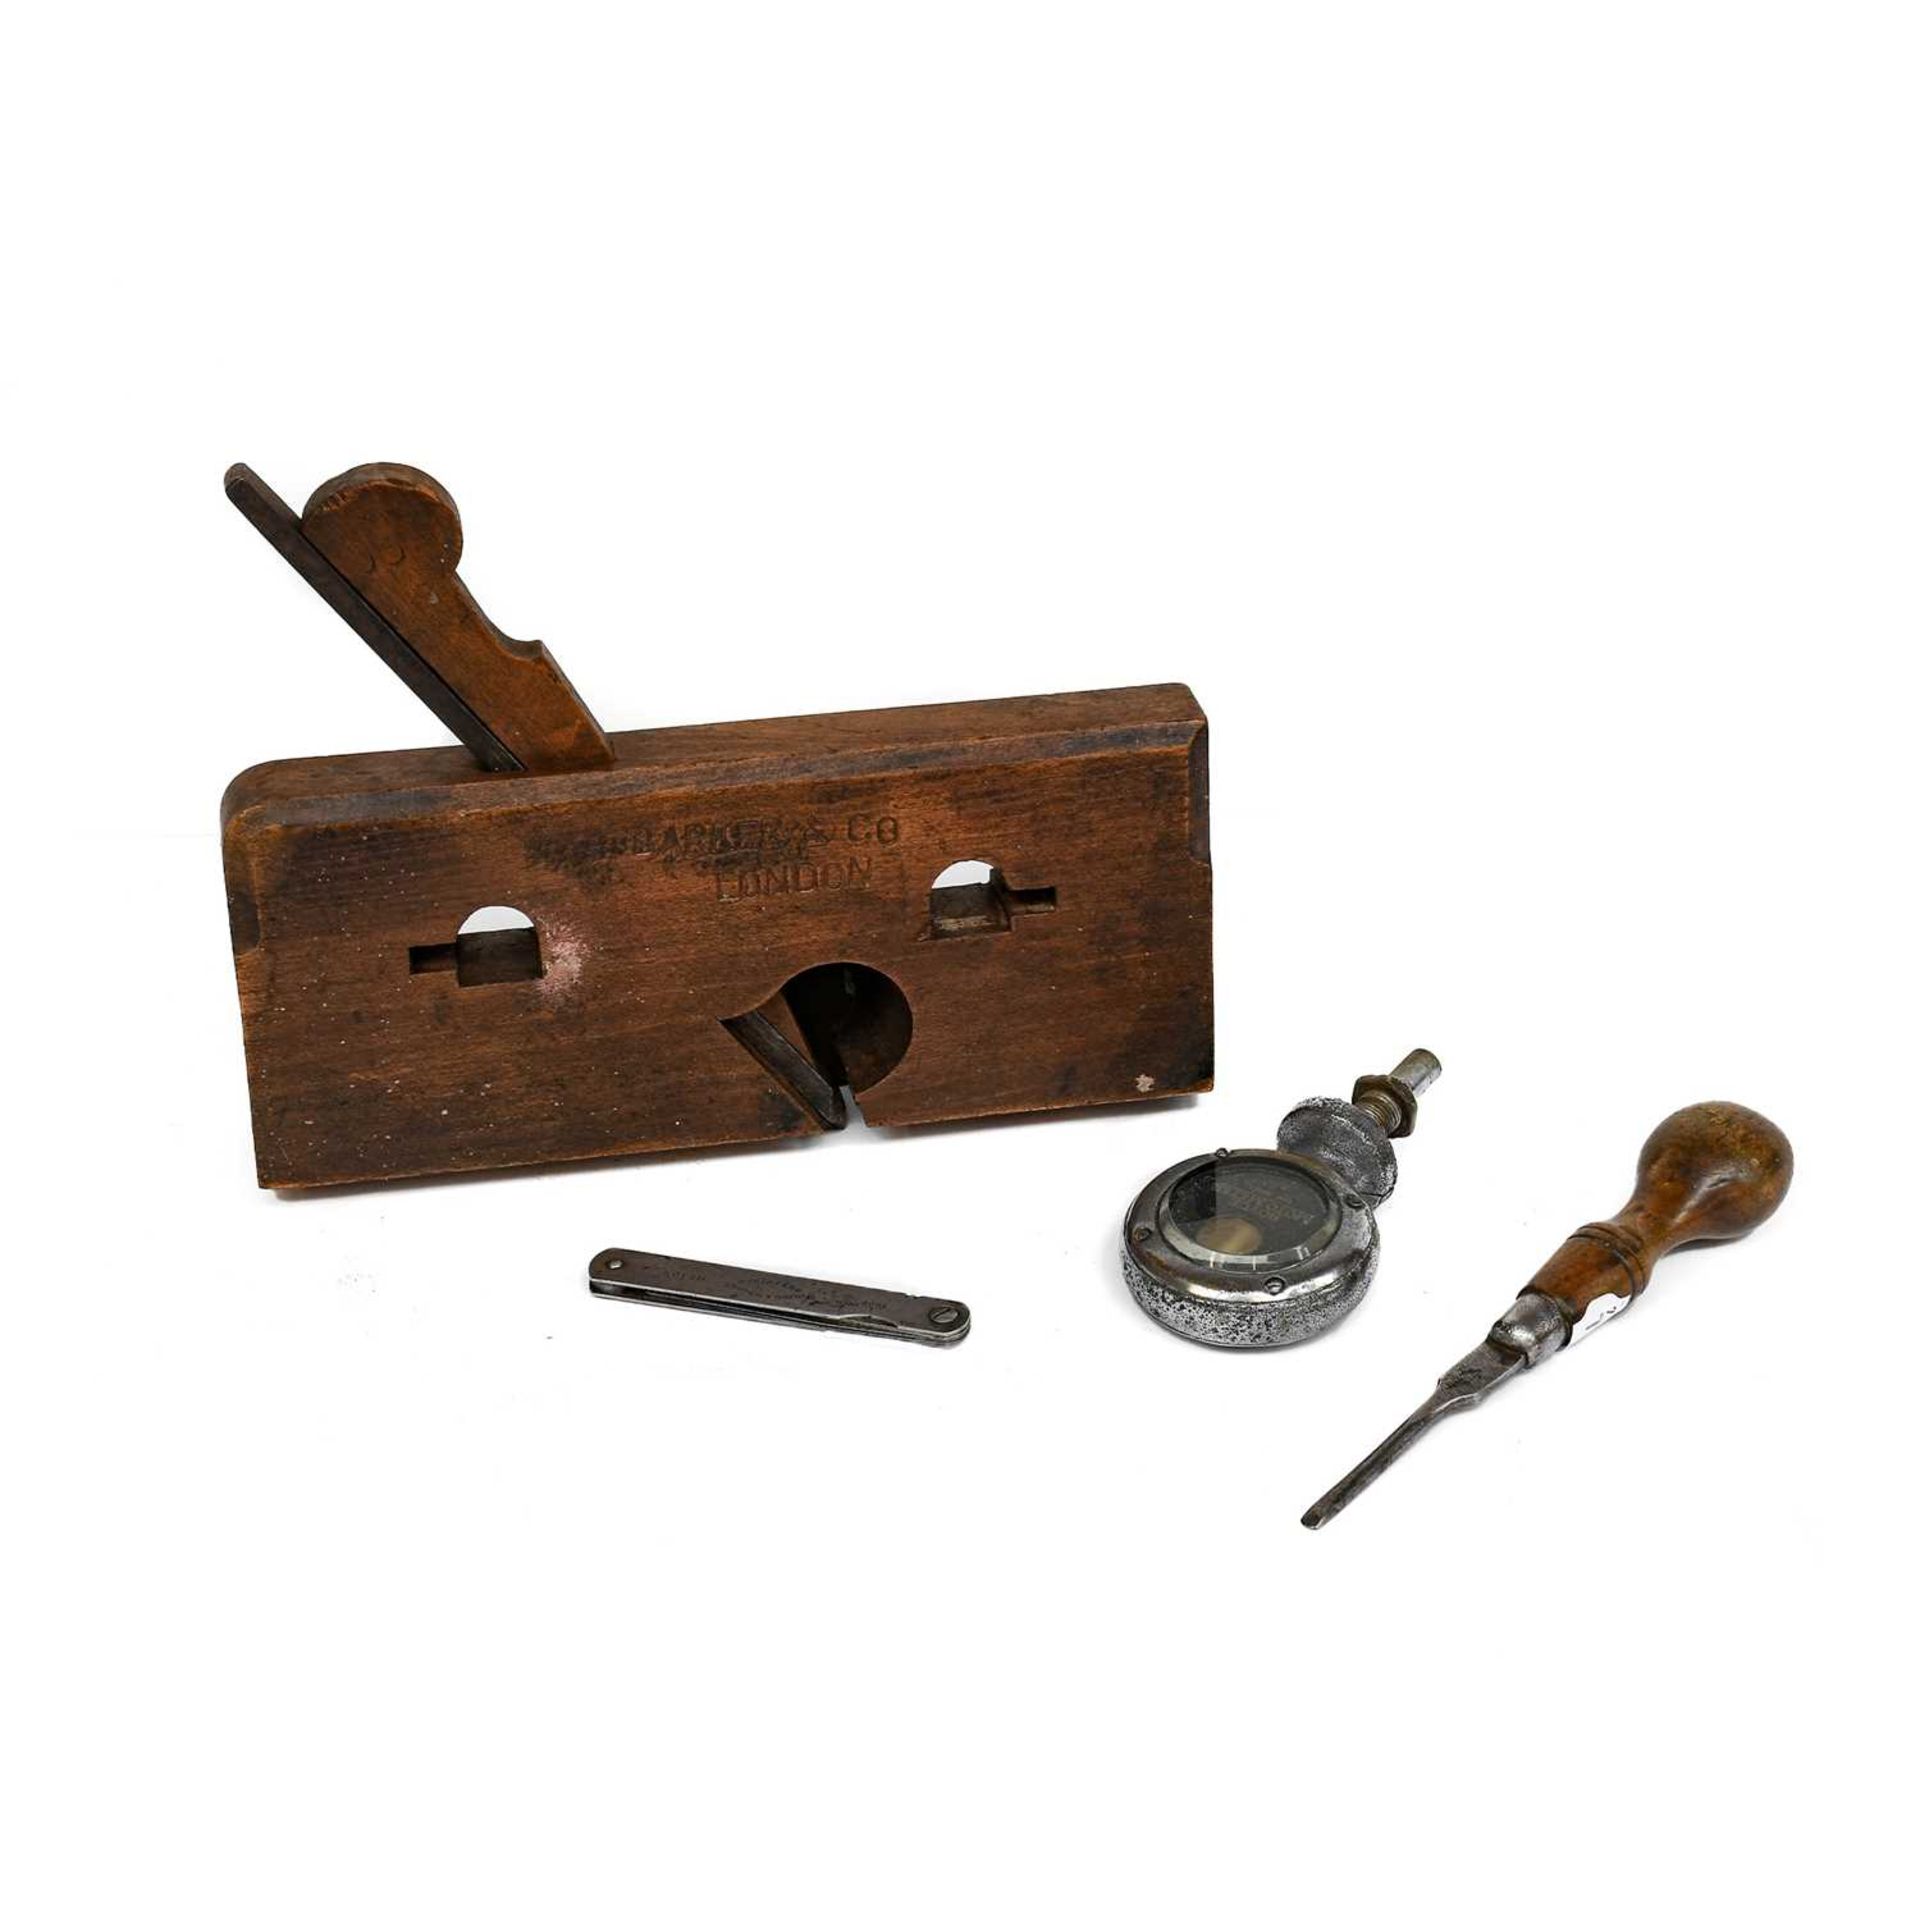 Barker & Co, London: The Wooden Builders Moulding Plane, numbered 09, Rolls-Royce: A Set of